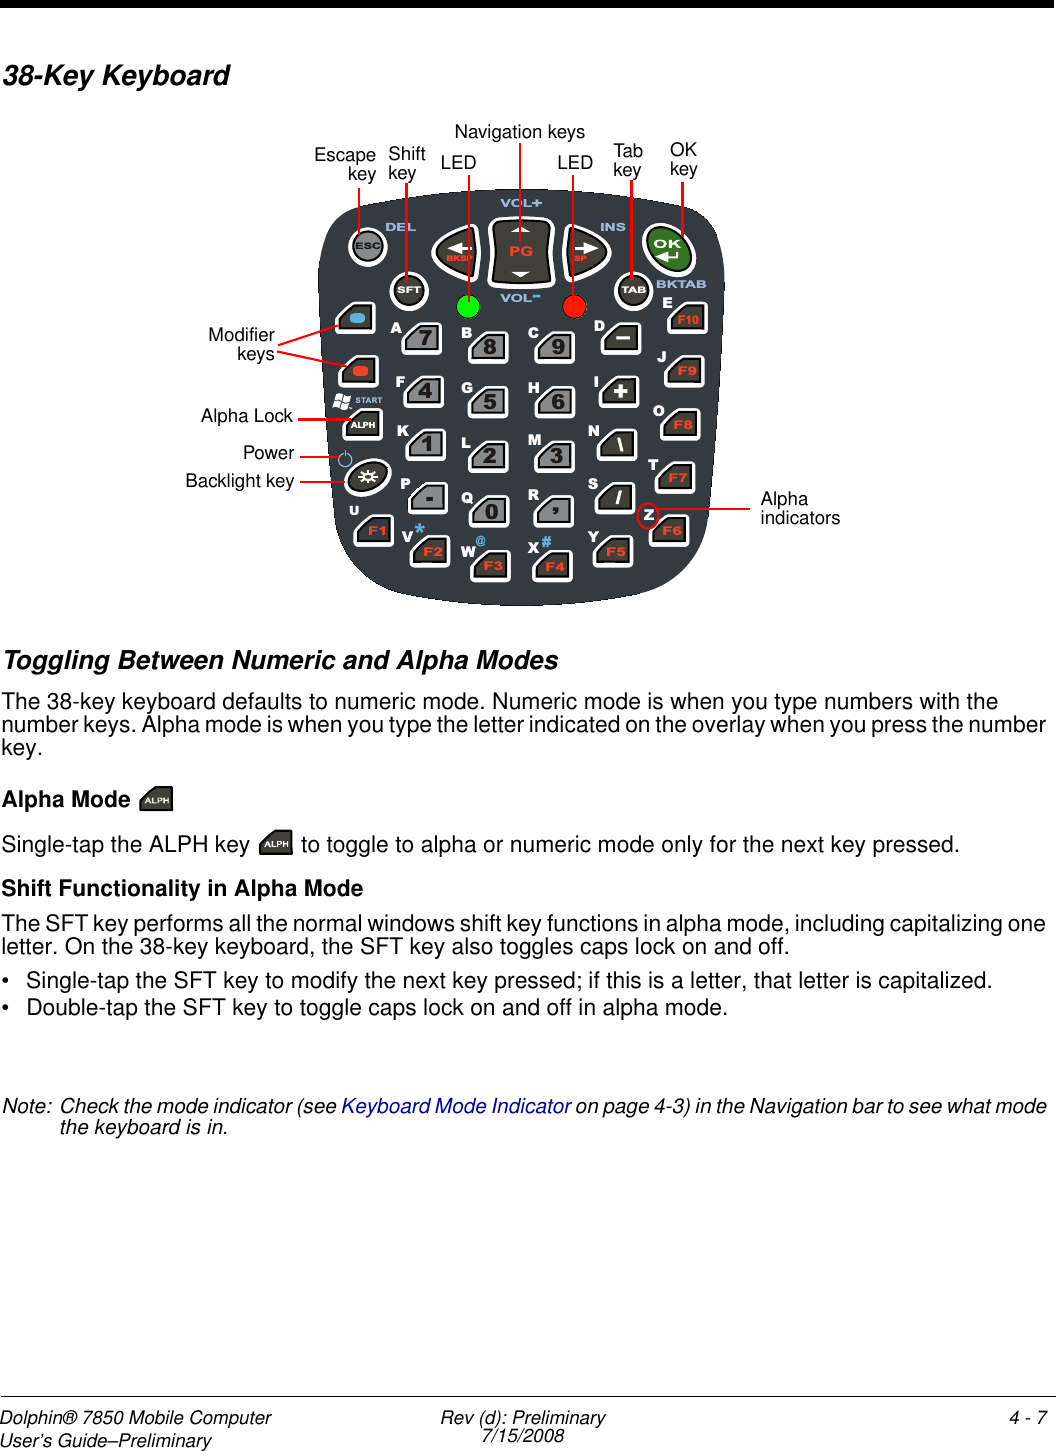 Dolphin® 7850 Mobile Computer  User’s Guide–Preliminary  Rev (d): Preliminary7/15/2008 4 - 738-Key KeyboardToggling Between Numeric and Alpha Modes The 38-key keyboard defaults to numeric mode. Numeric mode is when you type numbers with the number keys. Alpha mode is when you type the letter indicated on the overlay when you press the number key. Alpha Mode Single-tap the ALPH key   to toggle to alpha or numeric mode only for the next key pressed. Shift Functionality in Alpha ModeThe SFT key performs all the normal windows shift key functions in alpha mode, including capitalizing one letter. On the 38-key keyboard, the SFT key also toggles caps lock on and off.• Single-tap the SFT key to modify the next key pressed; if this is a letter, that letter is capitalized.• Double-tap the SFT key to toggle caps lock on and off in alpha mode.Note: Check the mode indicator (see Keyboard Mode Indicator on page 4-3) in the Navigation bar to see what mode the keyboard is in.F4 F5 F6 F7 F8 F9 F10 - + \ \ / / , 3 6 9 0 2 5 8 7 4 1 . BKSP PG SP TA B ESC ALPH F 1 F2 F3 SFT O B E J U A  C  D F  G  H  I K  L  M  N Q S T V W  X  Y Z ST ART P # *  @ DEL VOL + VOL - INS R BKTABEscapekeyPowerBacklight keyOK keyNavigation keys Tab keyAlpha indicators ModifierkeysShift key LED LEDAlpha Lock